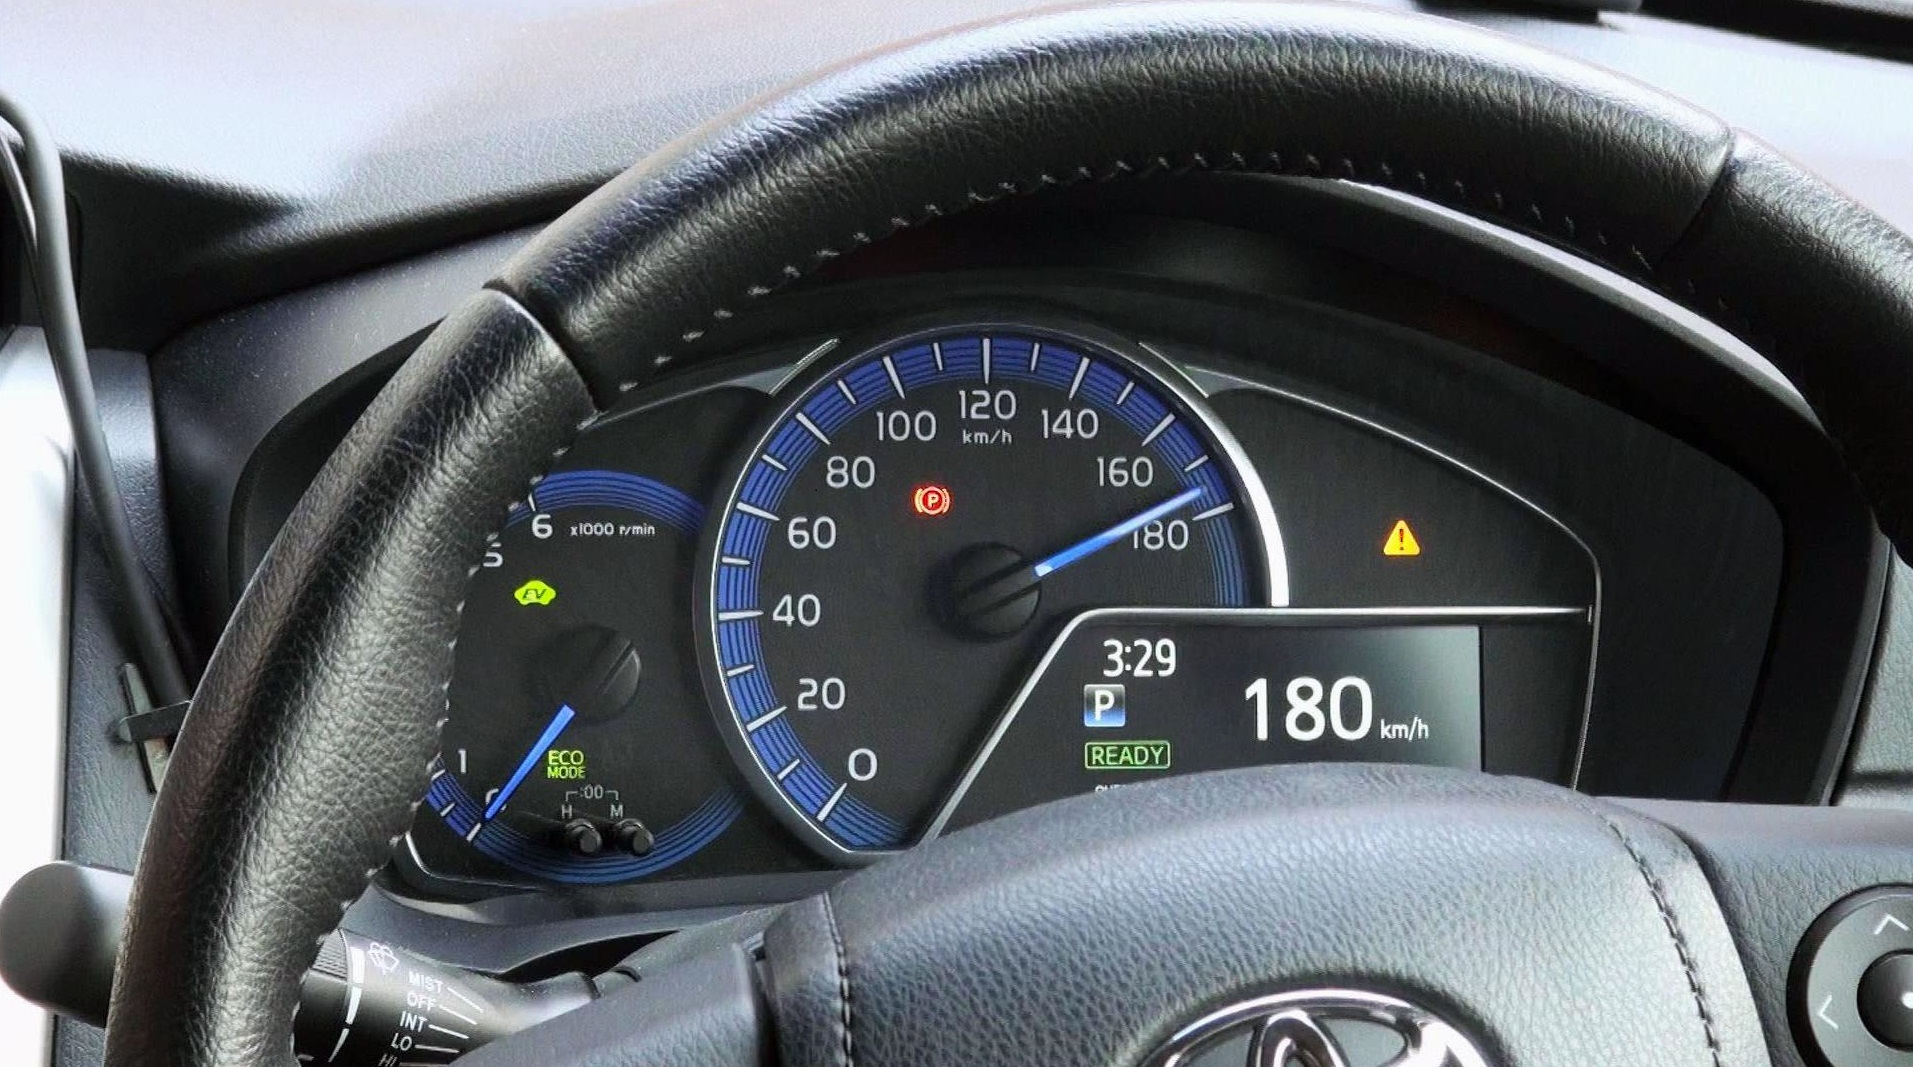 In a hacking experiment carried out in Hiroshima on Dec. 1, the speedometer in a parked vehicle shows 180 kph. | KYODO